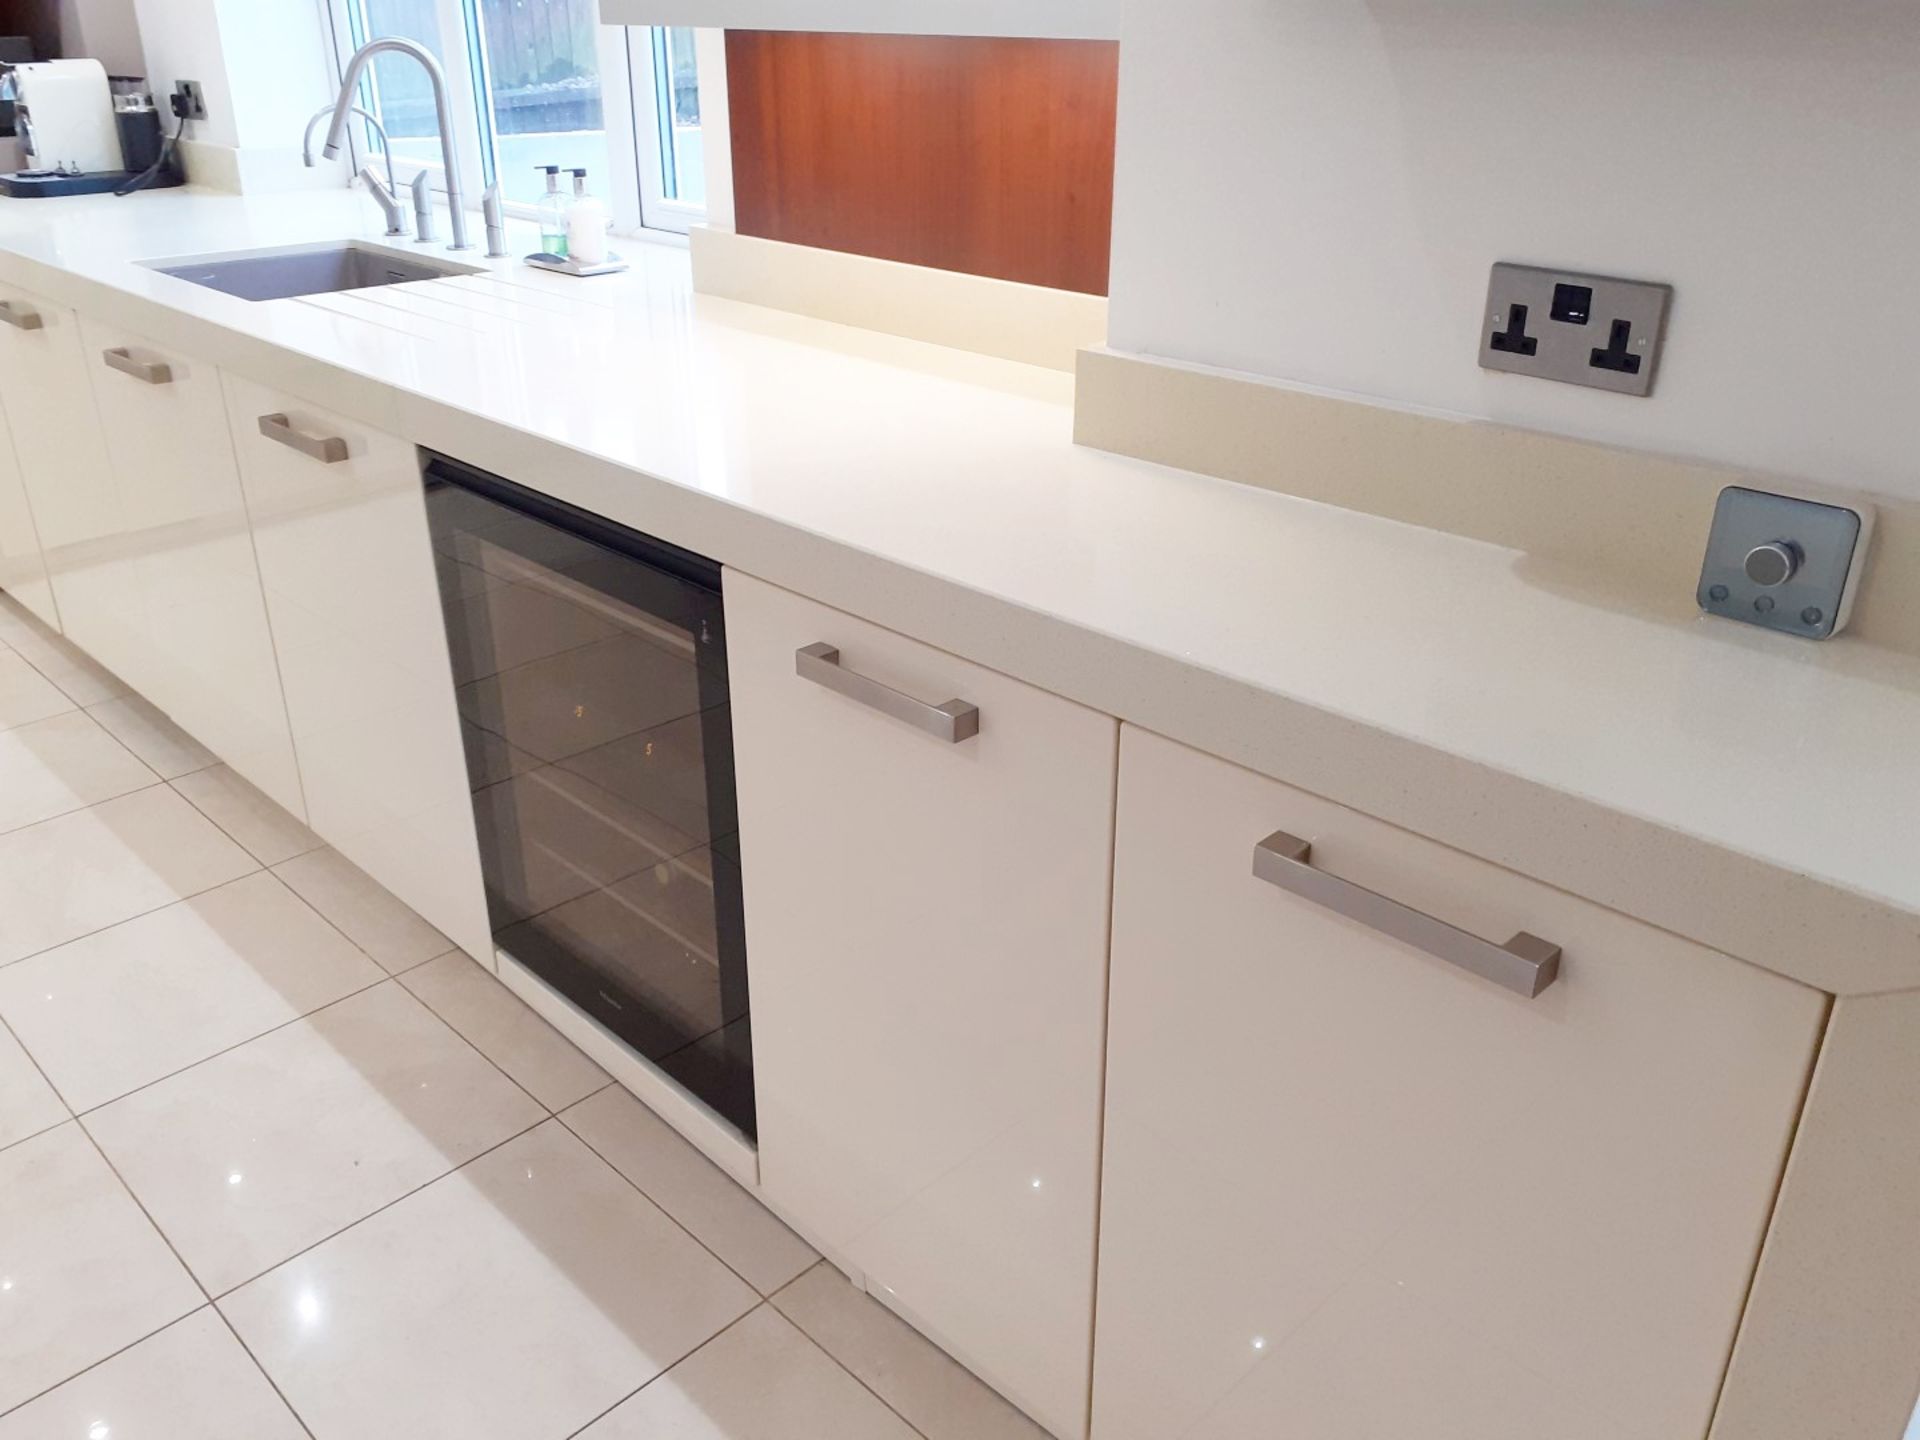 1 x ALNO Fitted Gloss White Kitchen With Integrated Miele Appliances, Silestone Worktops And A - Image 82 of 86